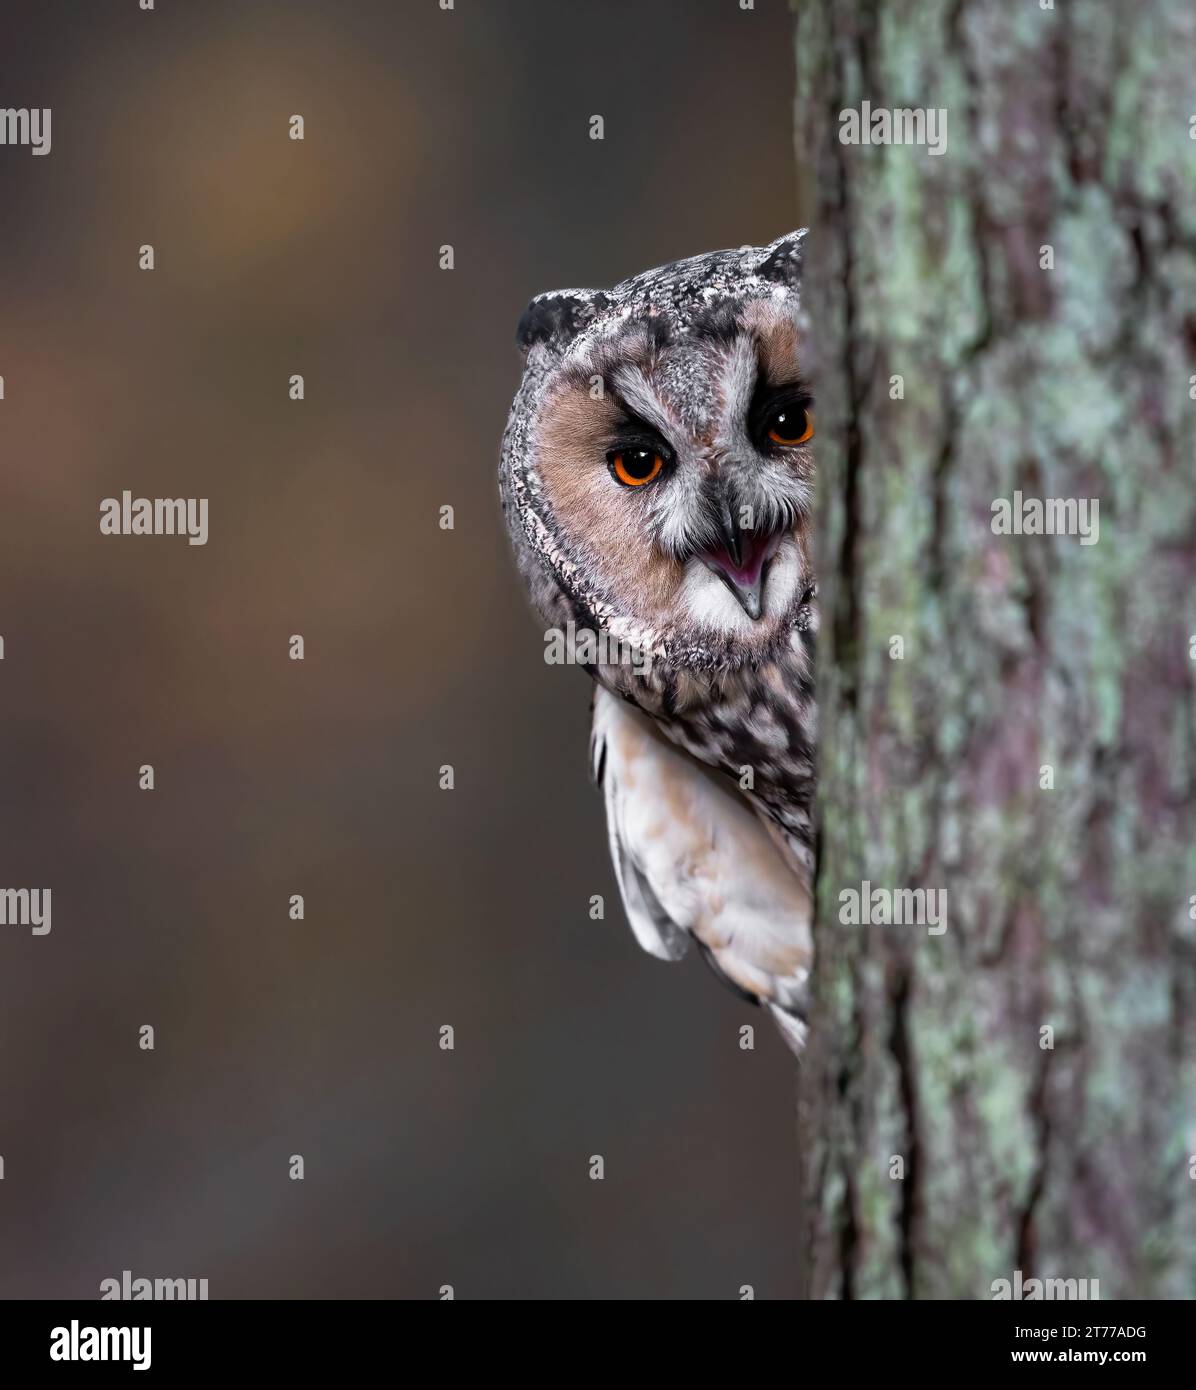 Long Eared Owl peeping around the side of a tree, screeching Stock Photo